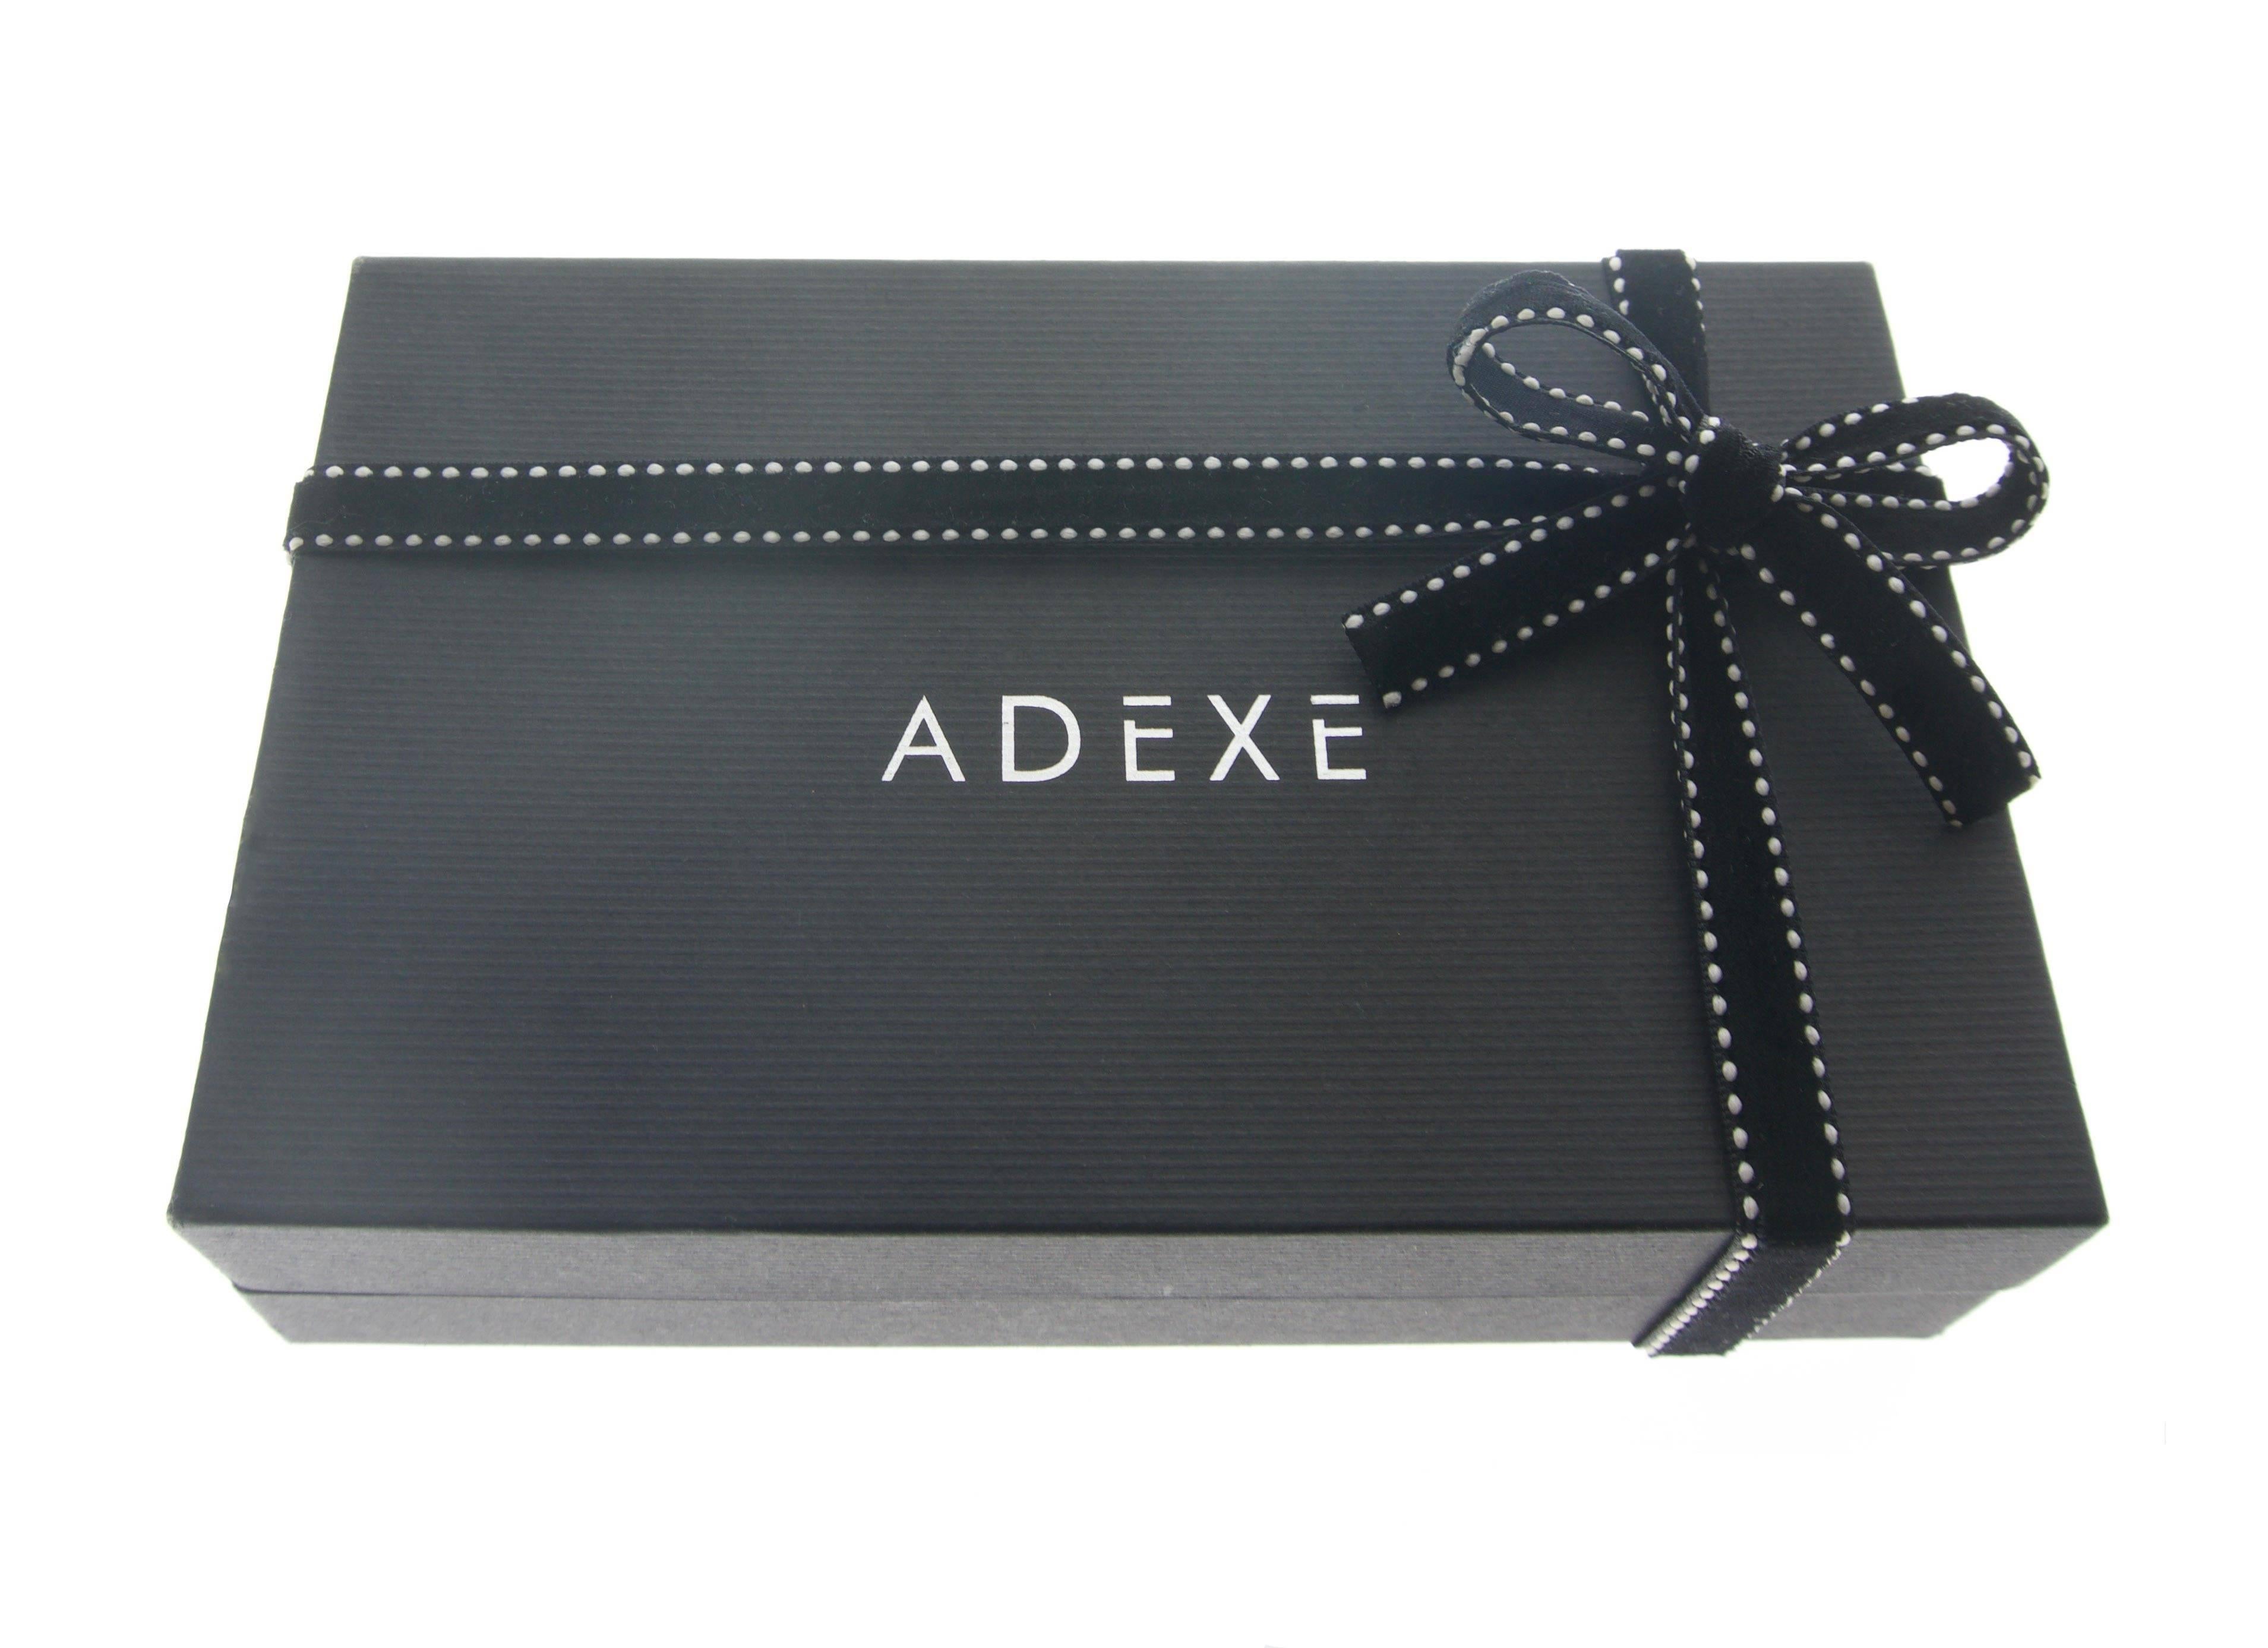 Adexe Stainless Steel They Minimal Silver Wristwatch In New Condition For Sale In London, GB